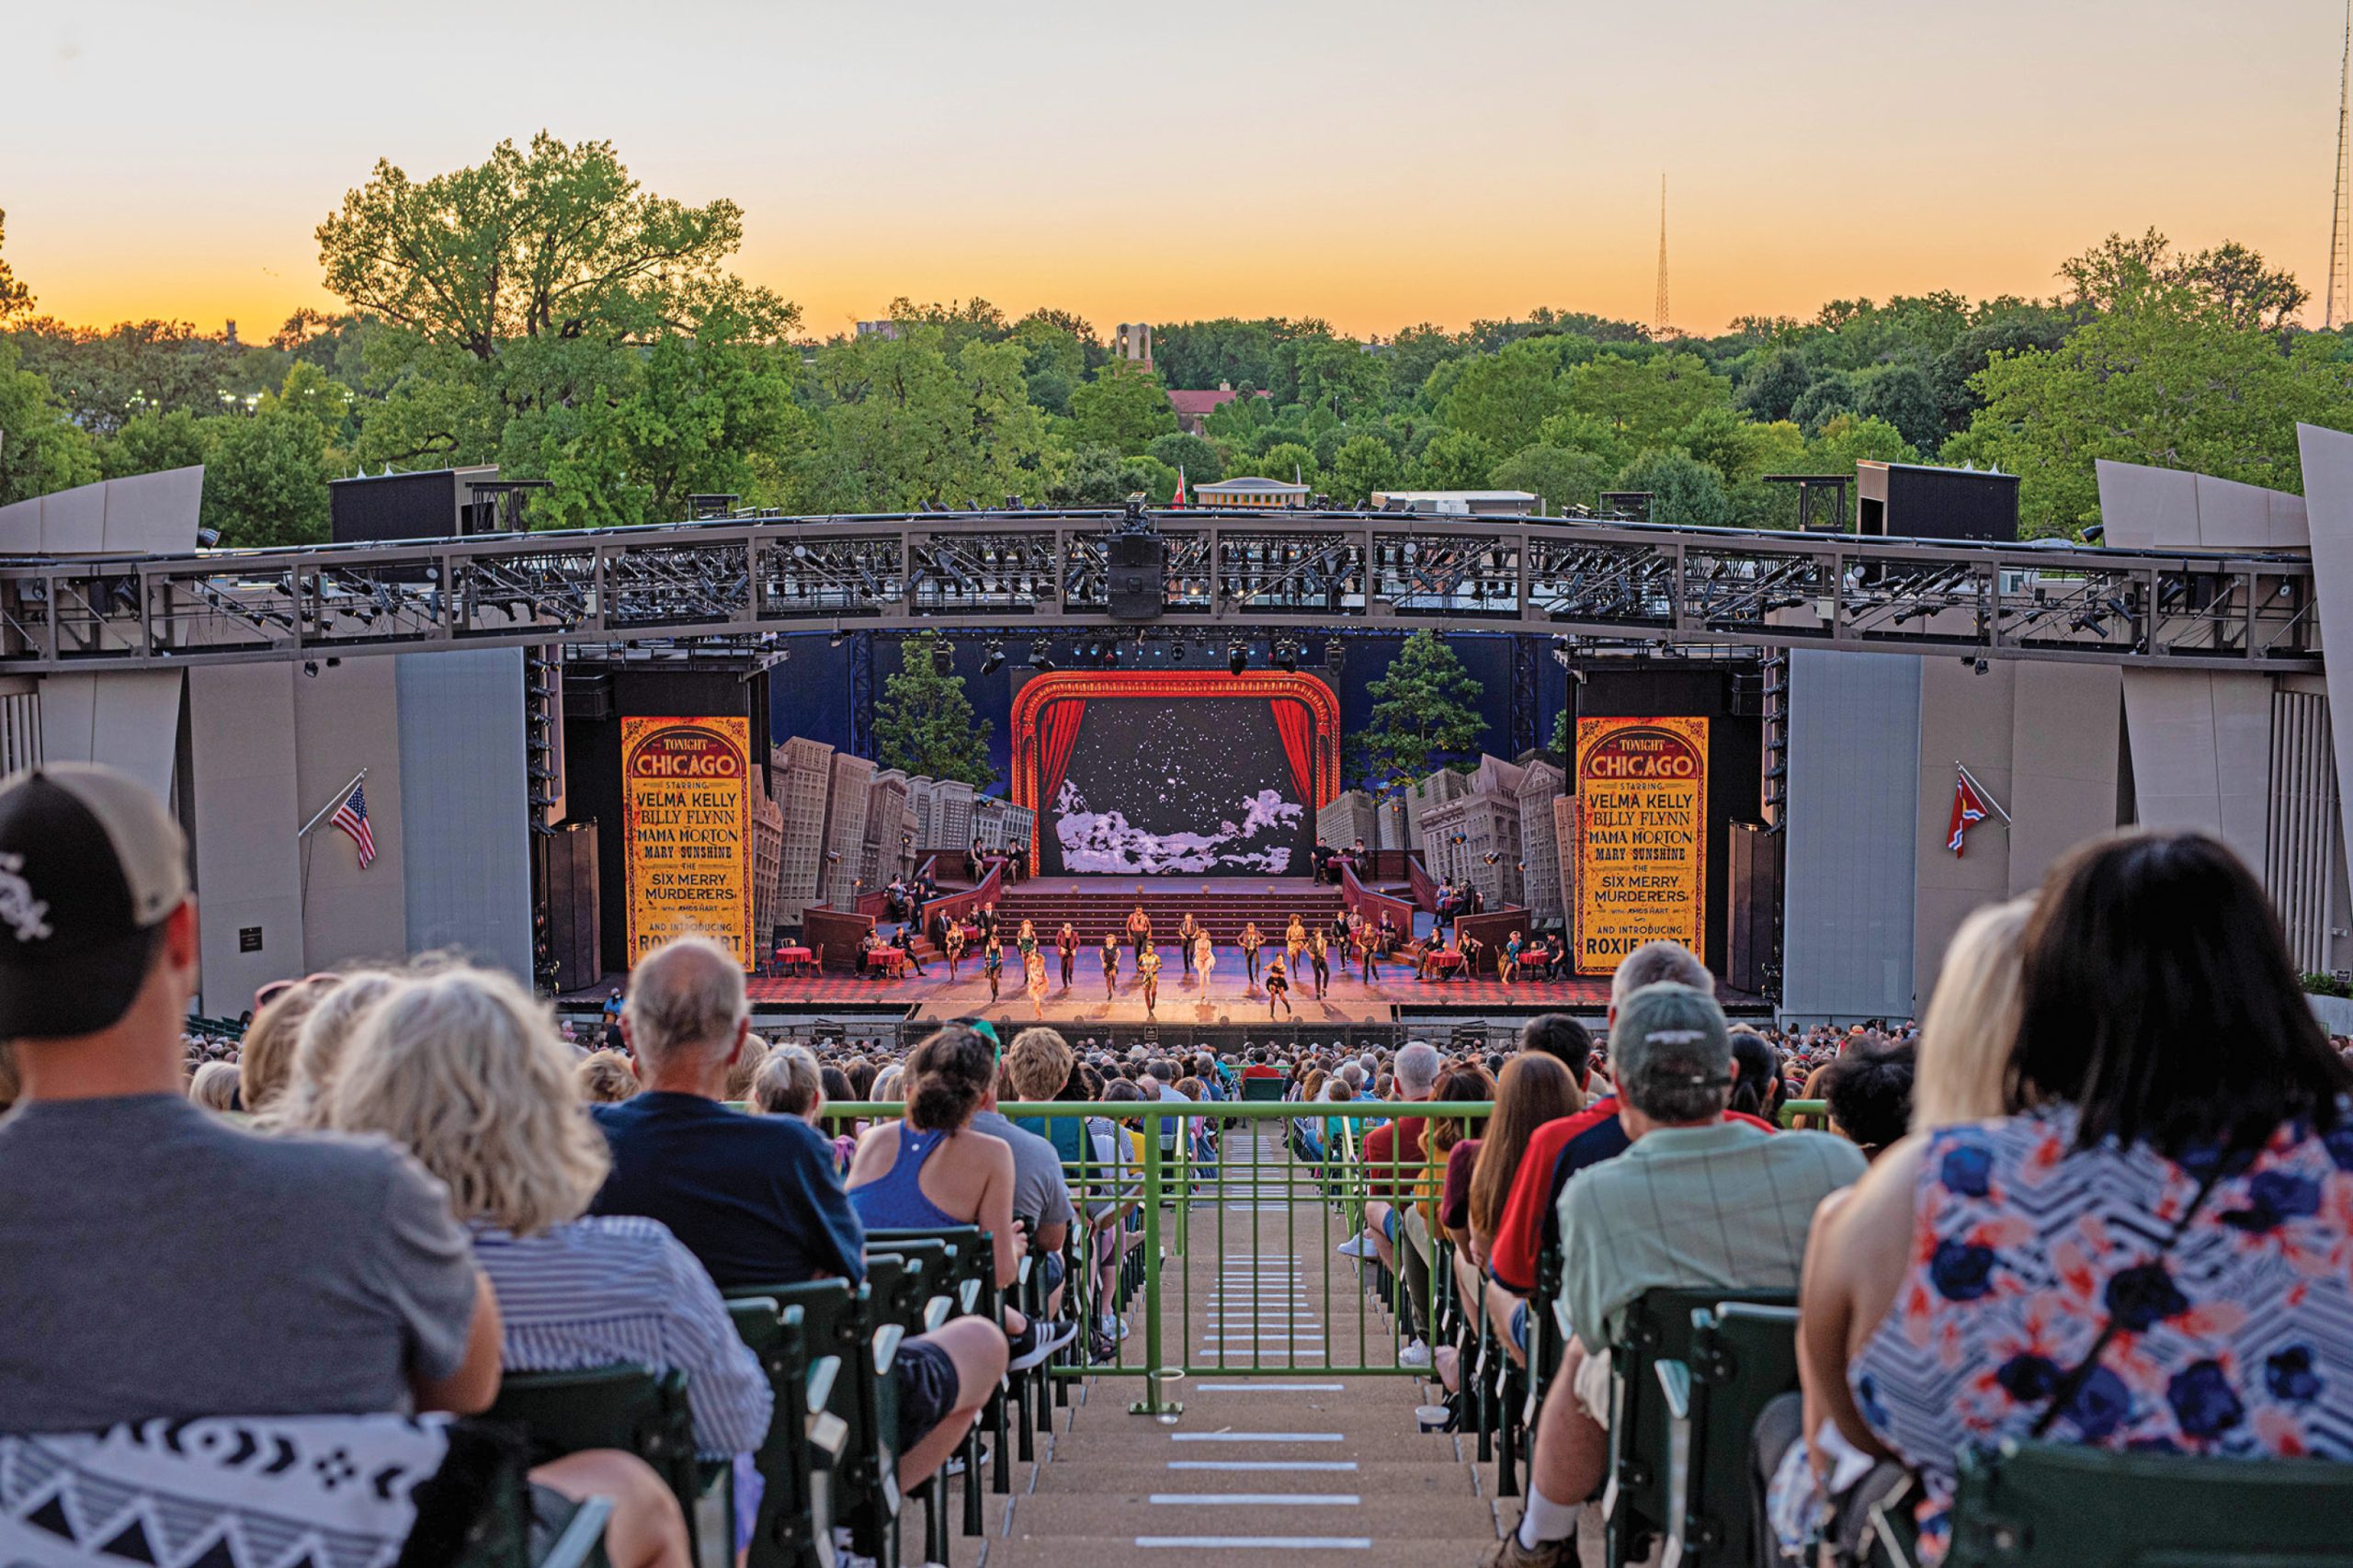 What's coming summer 2023 to The Muny?